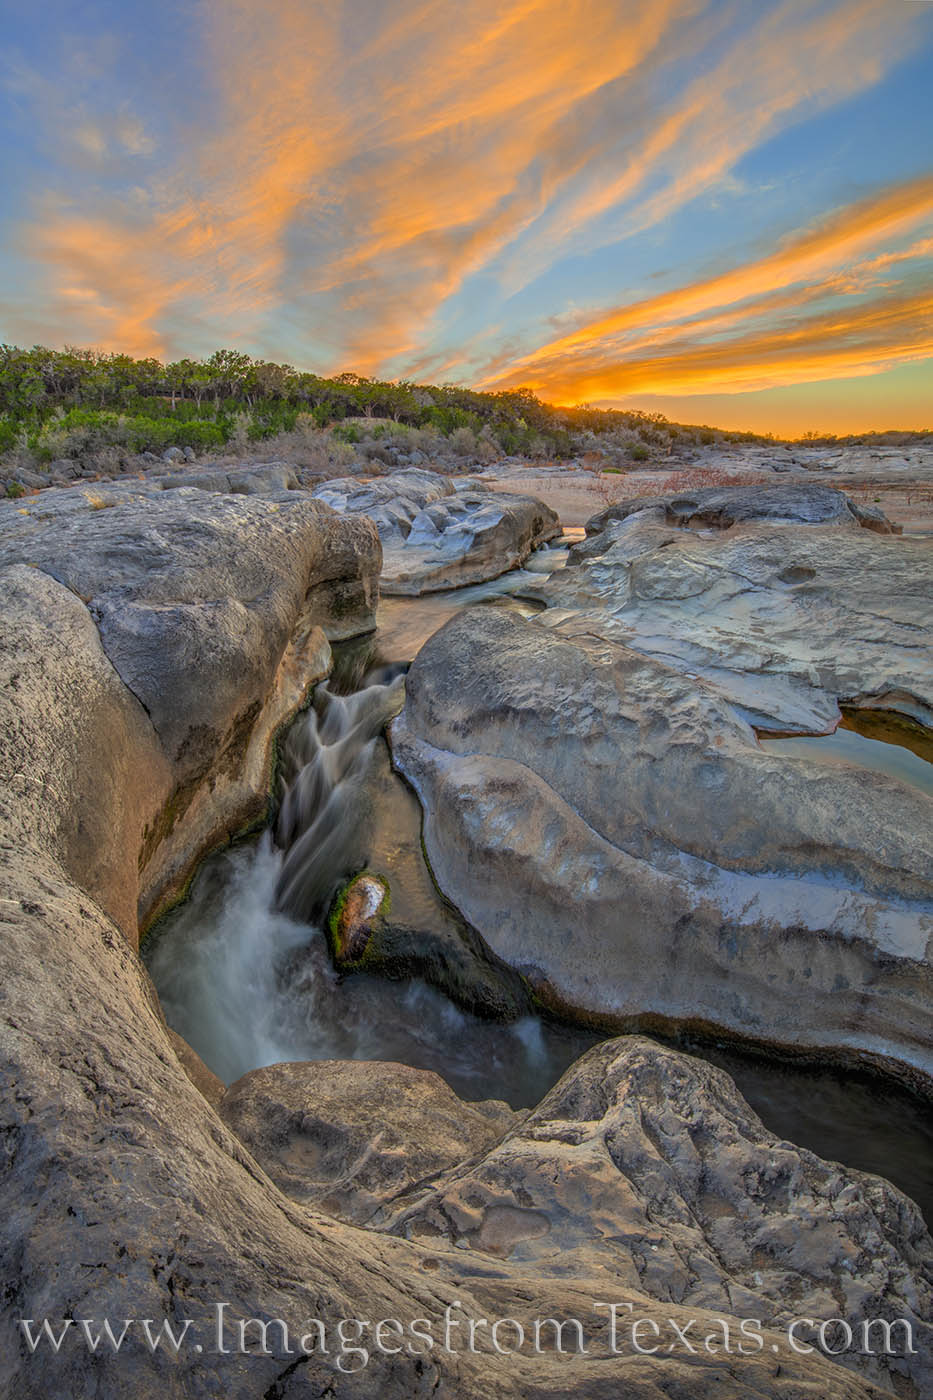 On a lovely spring evening at Pedernales Falls State Park, the colors of the sky light up above the waters below. The river flows...